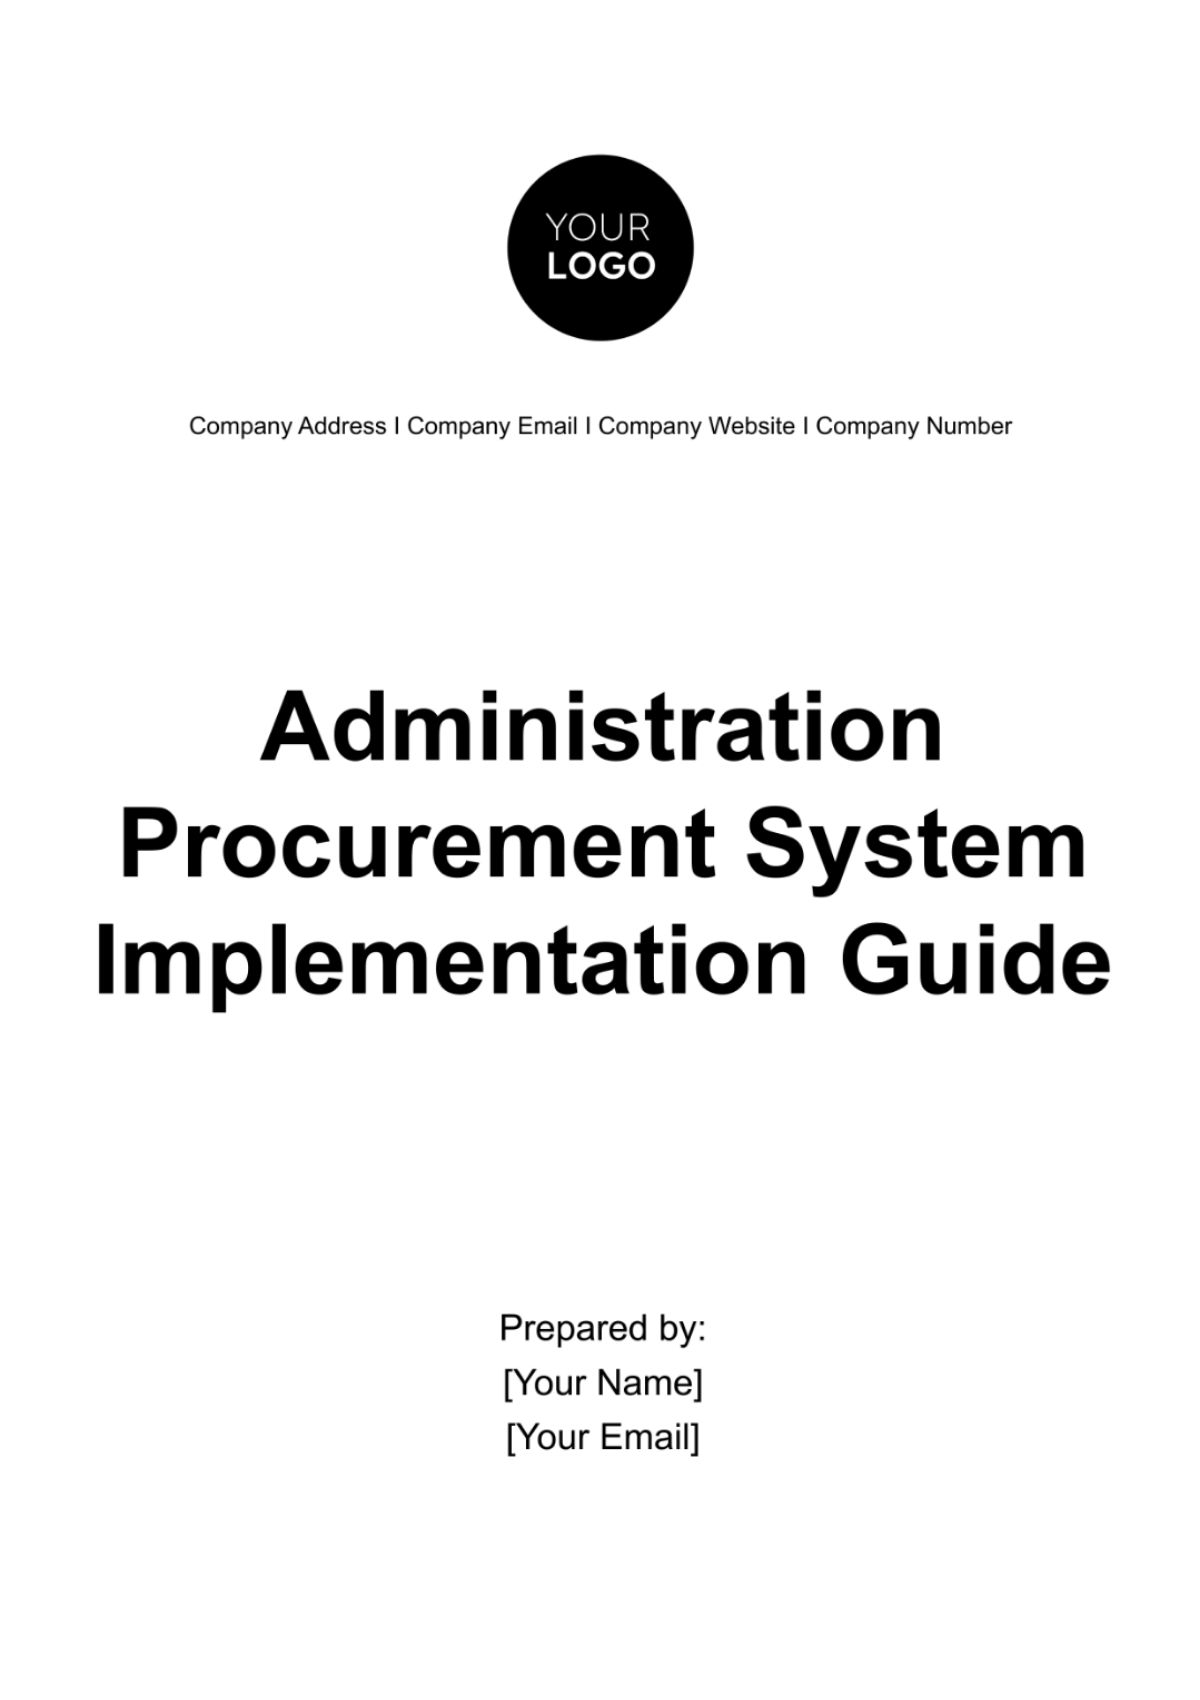 Administration Procurement System Implementation Guide Template